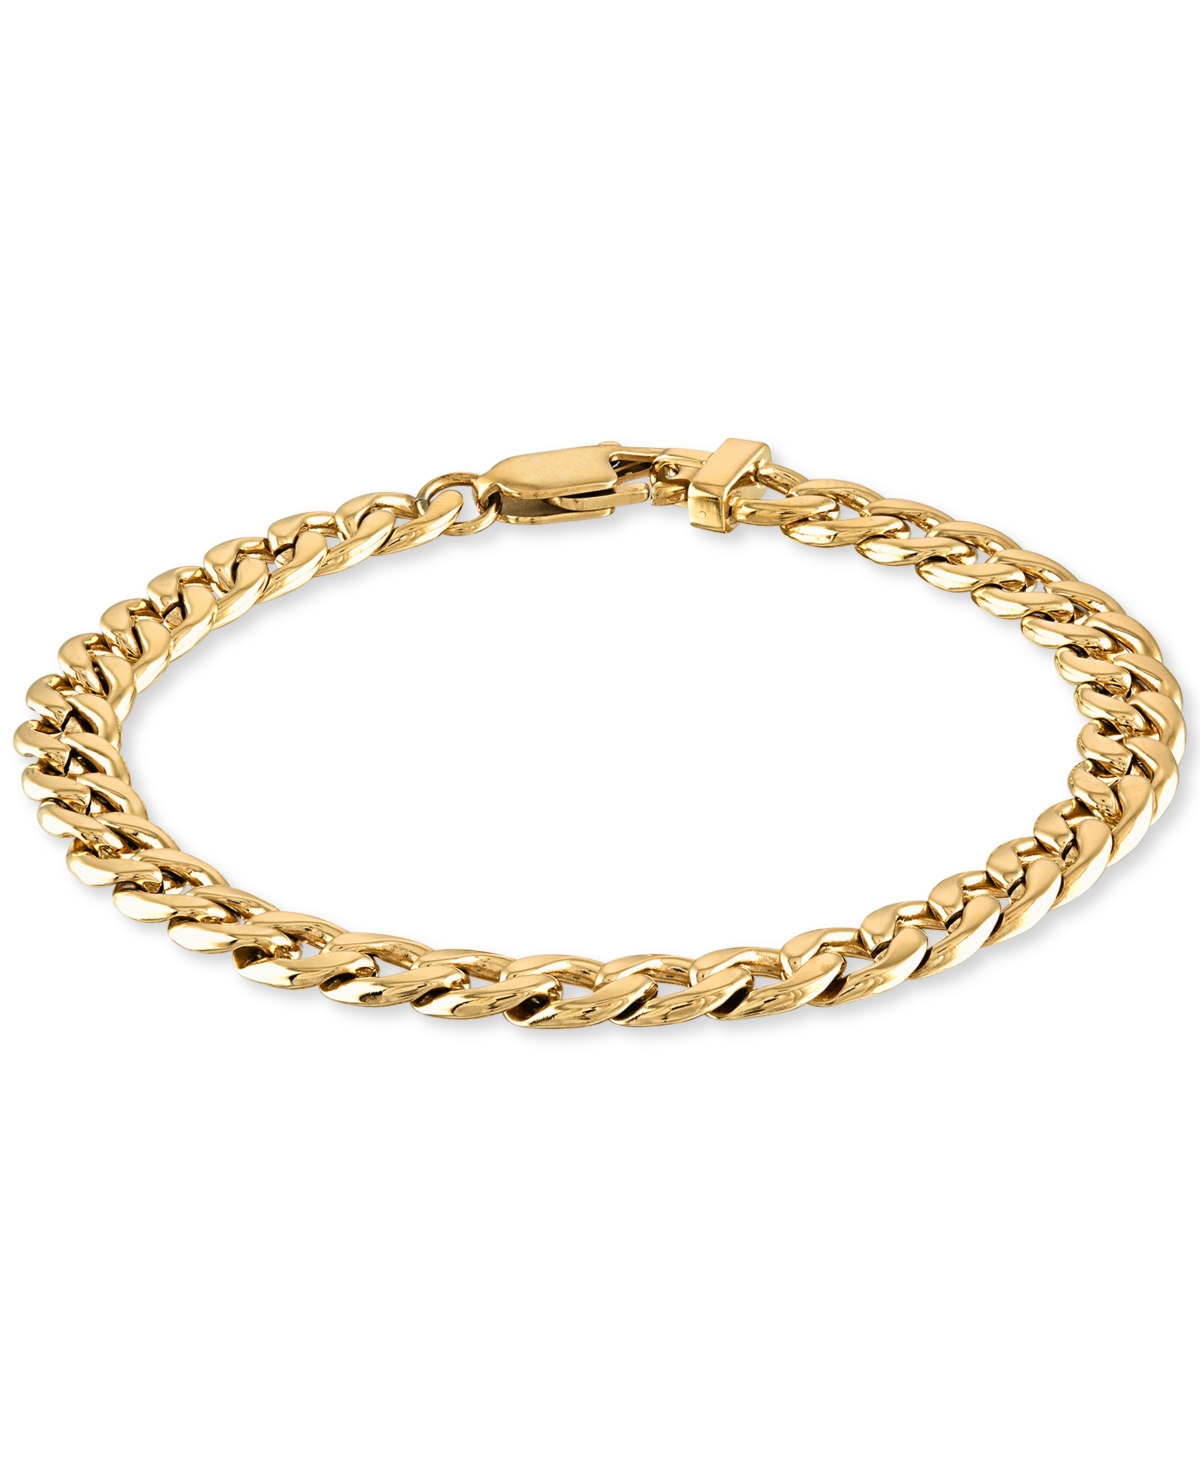 Esquire Men's Jewelry Curb Link Chain Bracelet in Gold-Tone Ion-Plated Stainless Steel, Created for Macy's ( Also available in Stainless Steel)